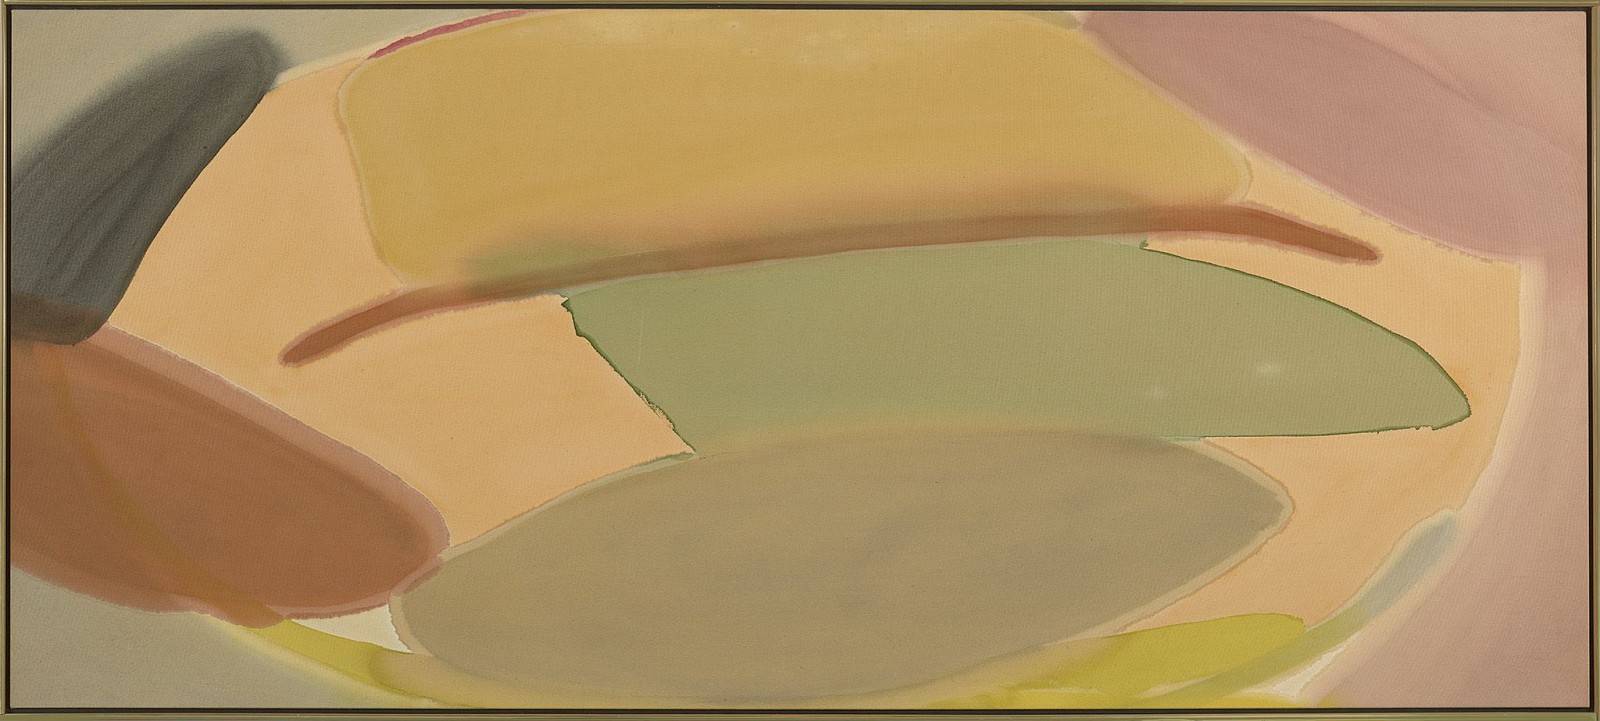 Larry Zox, Wind Mix, 1975-79
Acrylic on canvas, 38 1/2 x 87 1/2 in. (97.8 x 222.2 cm)
ZOX-00104